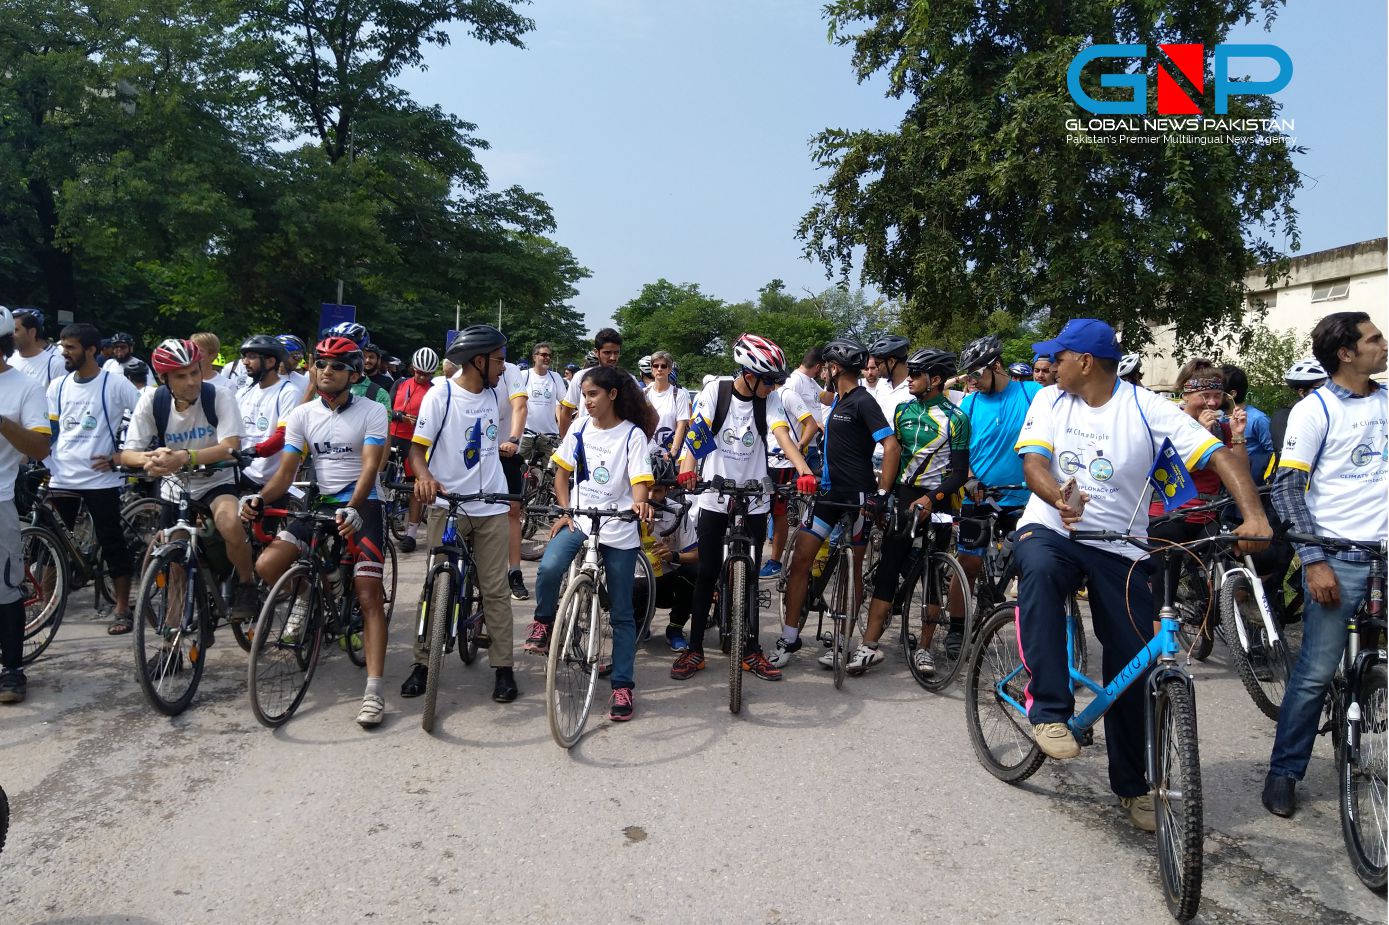 Pedalling for action on climate change 8